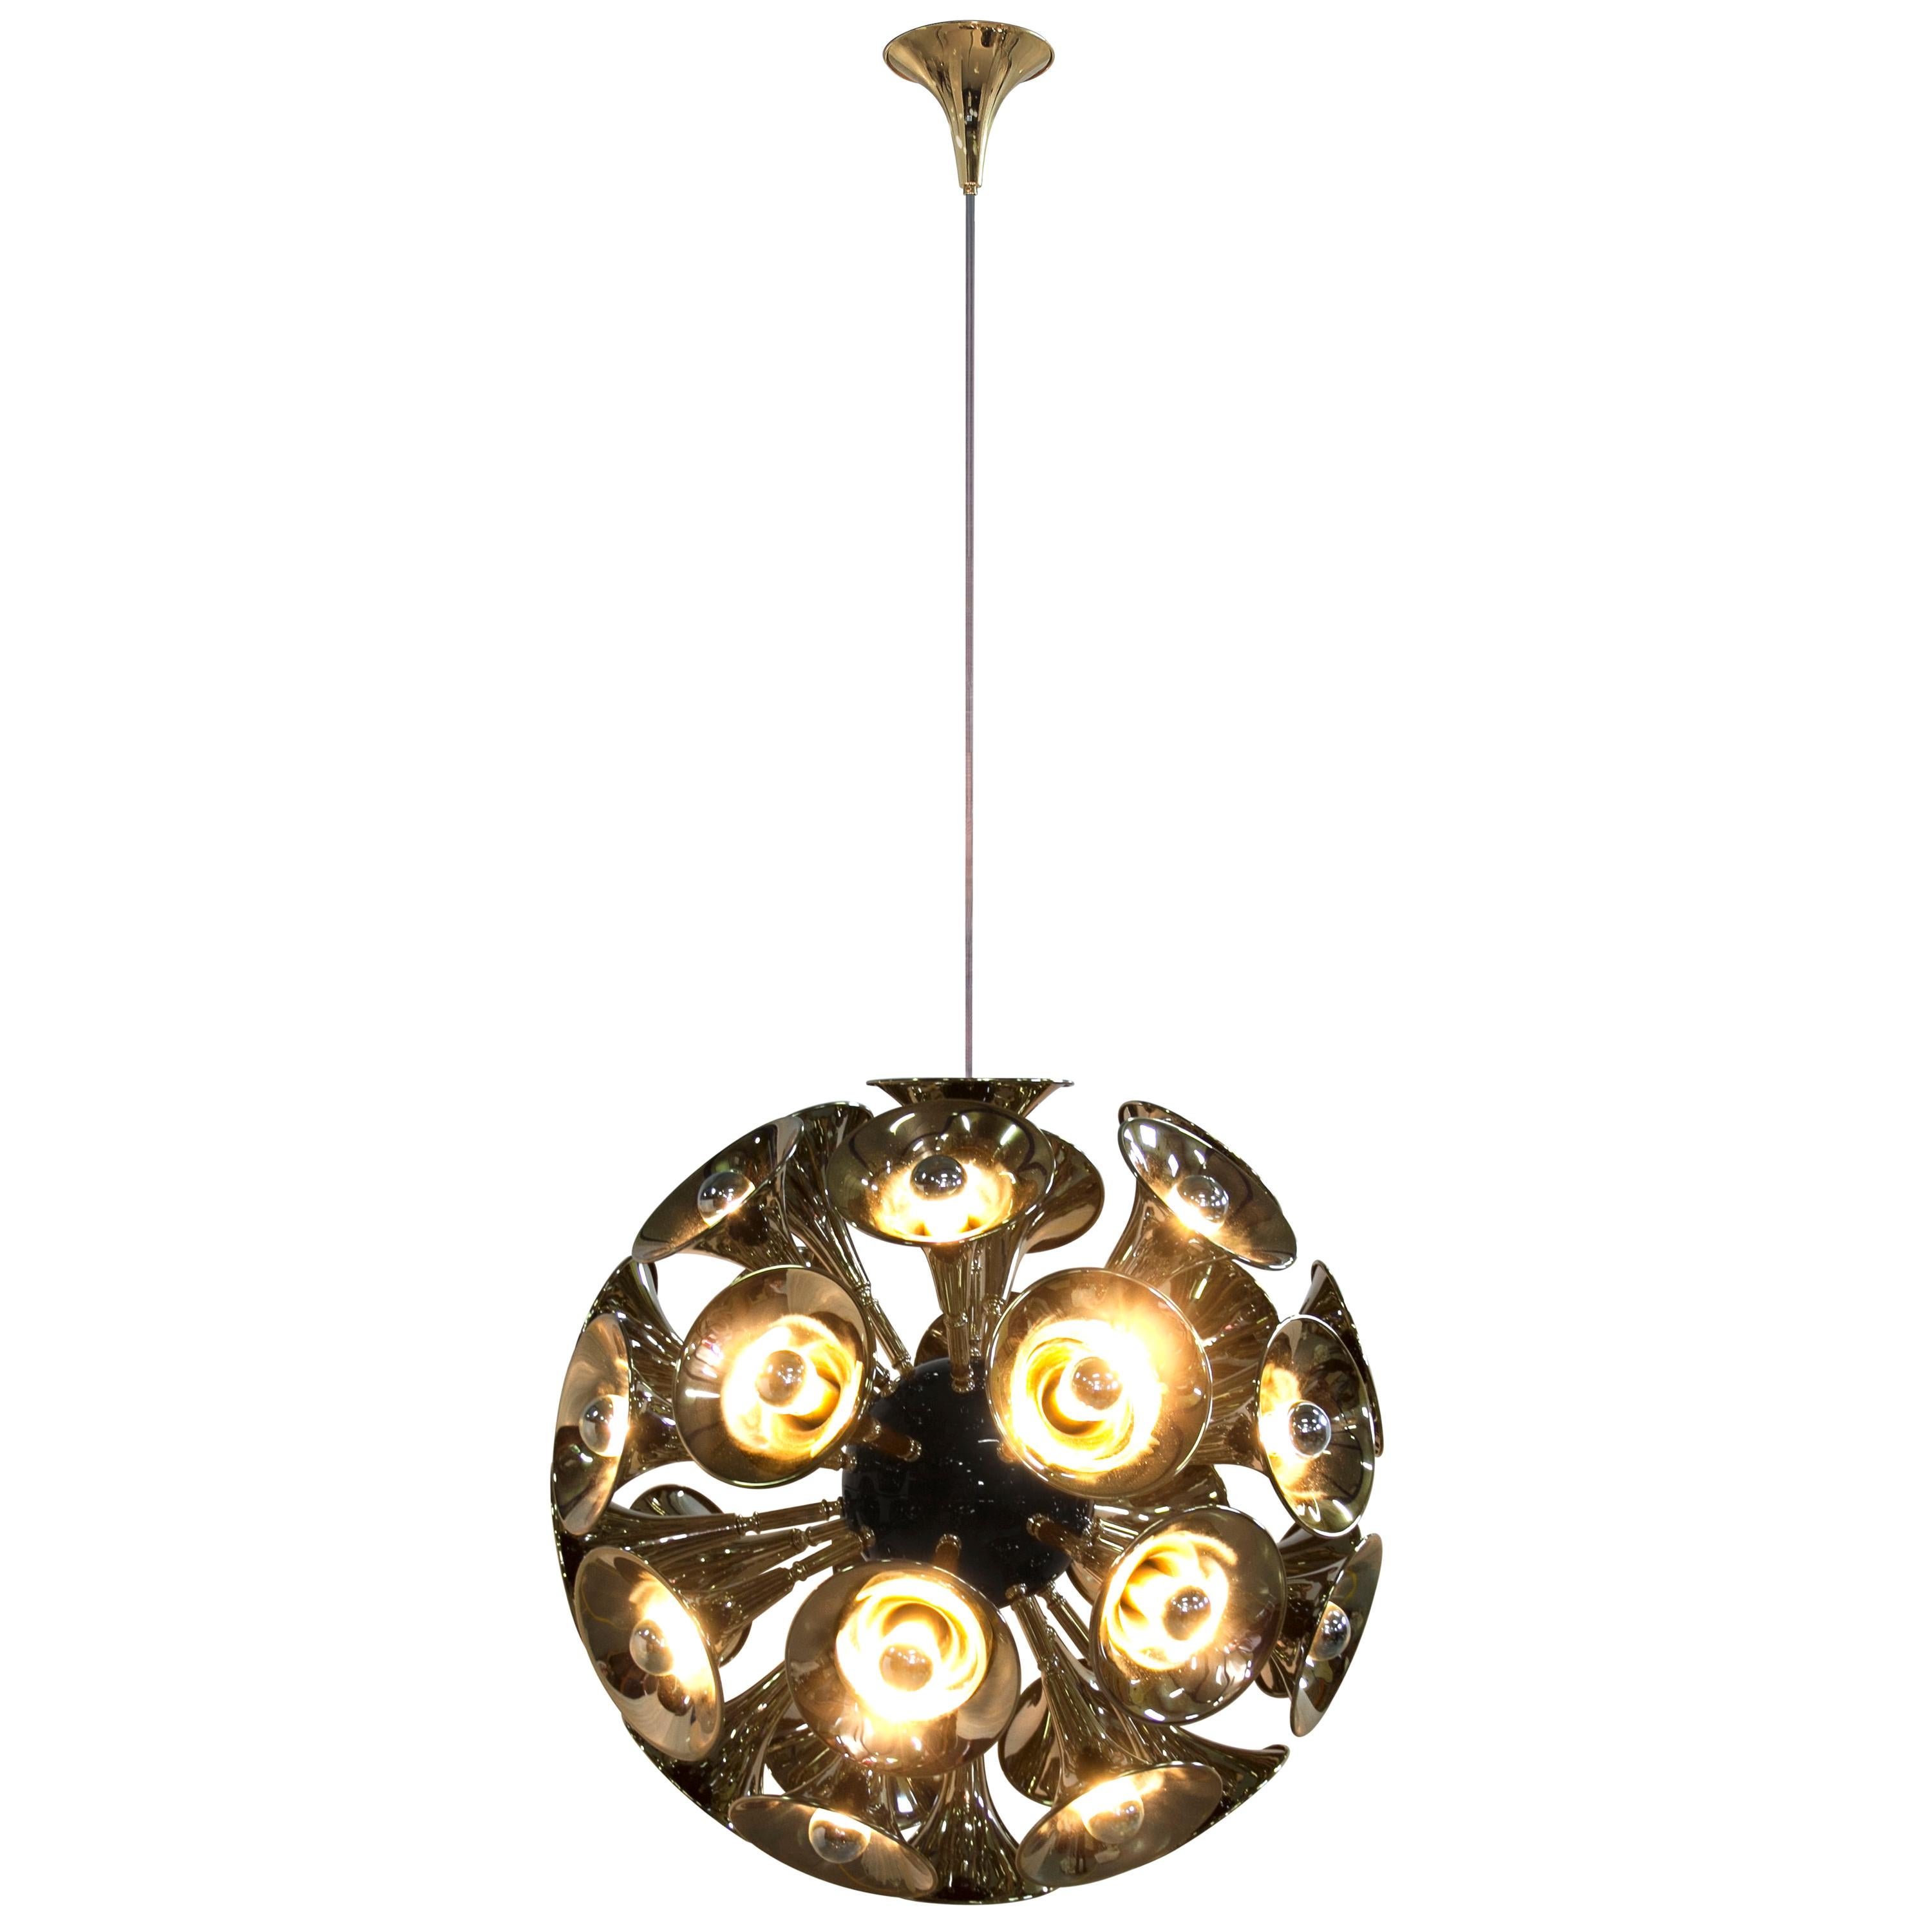 Botti pendant light in Gold and Brass For Sale